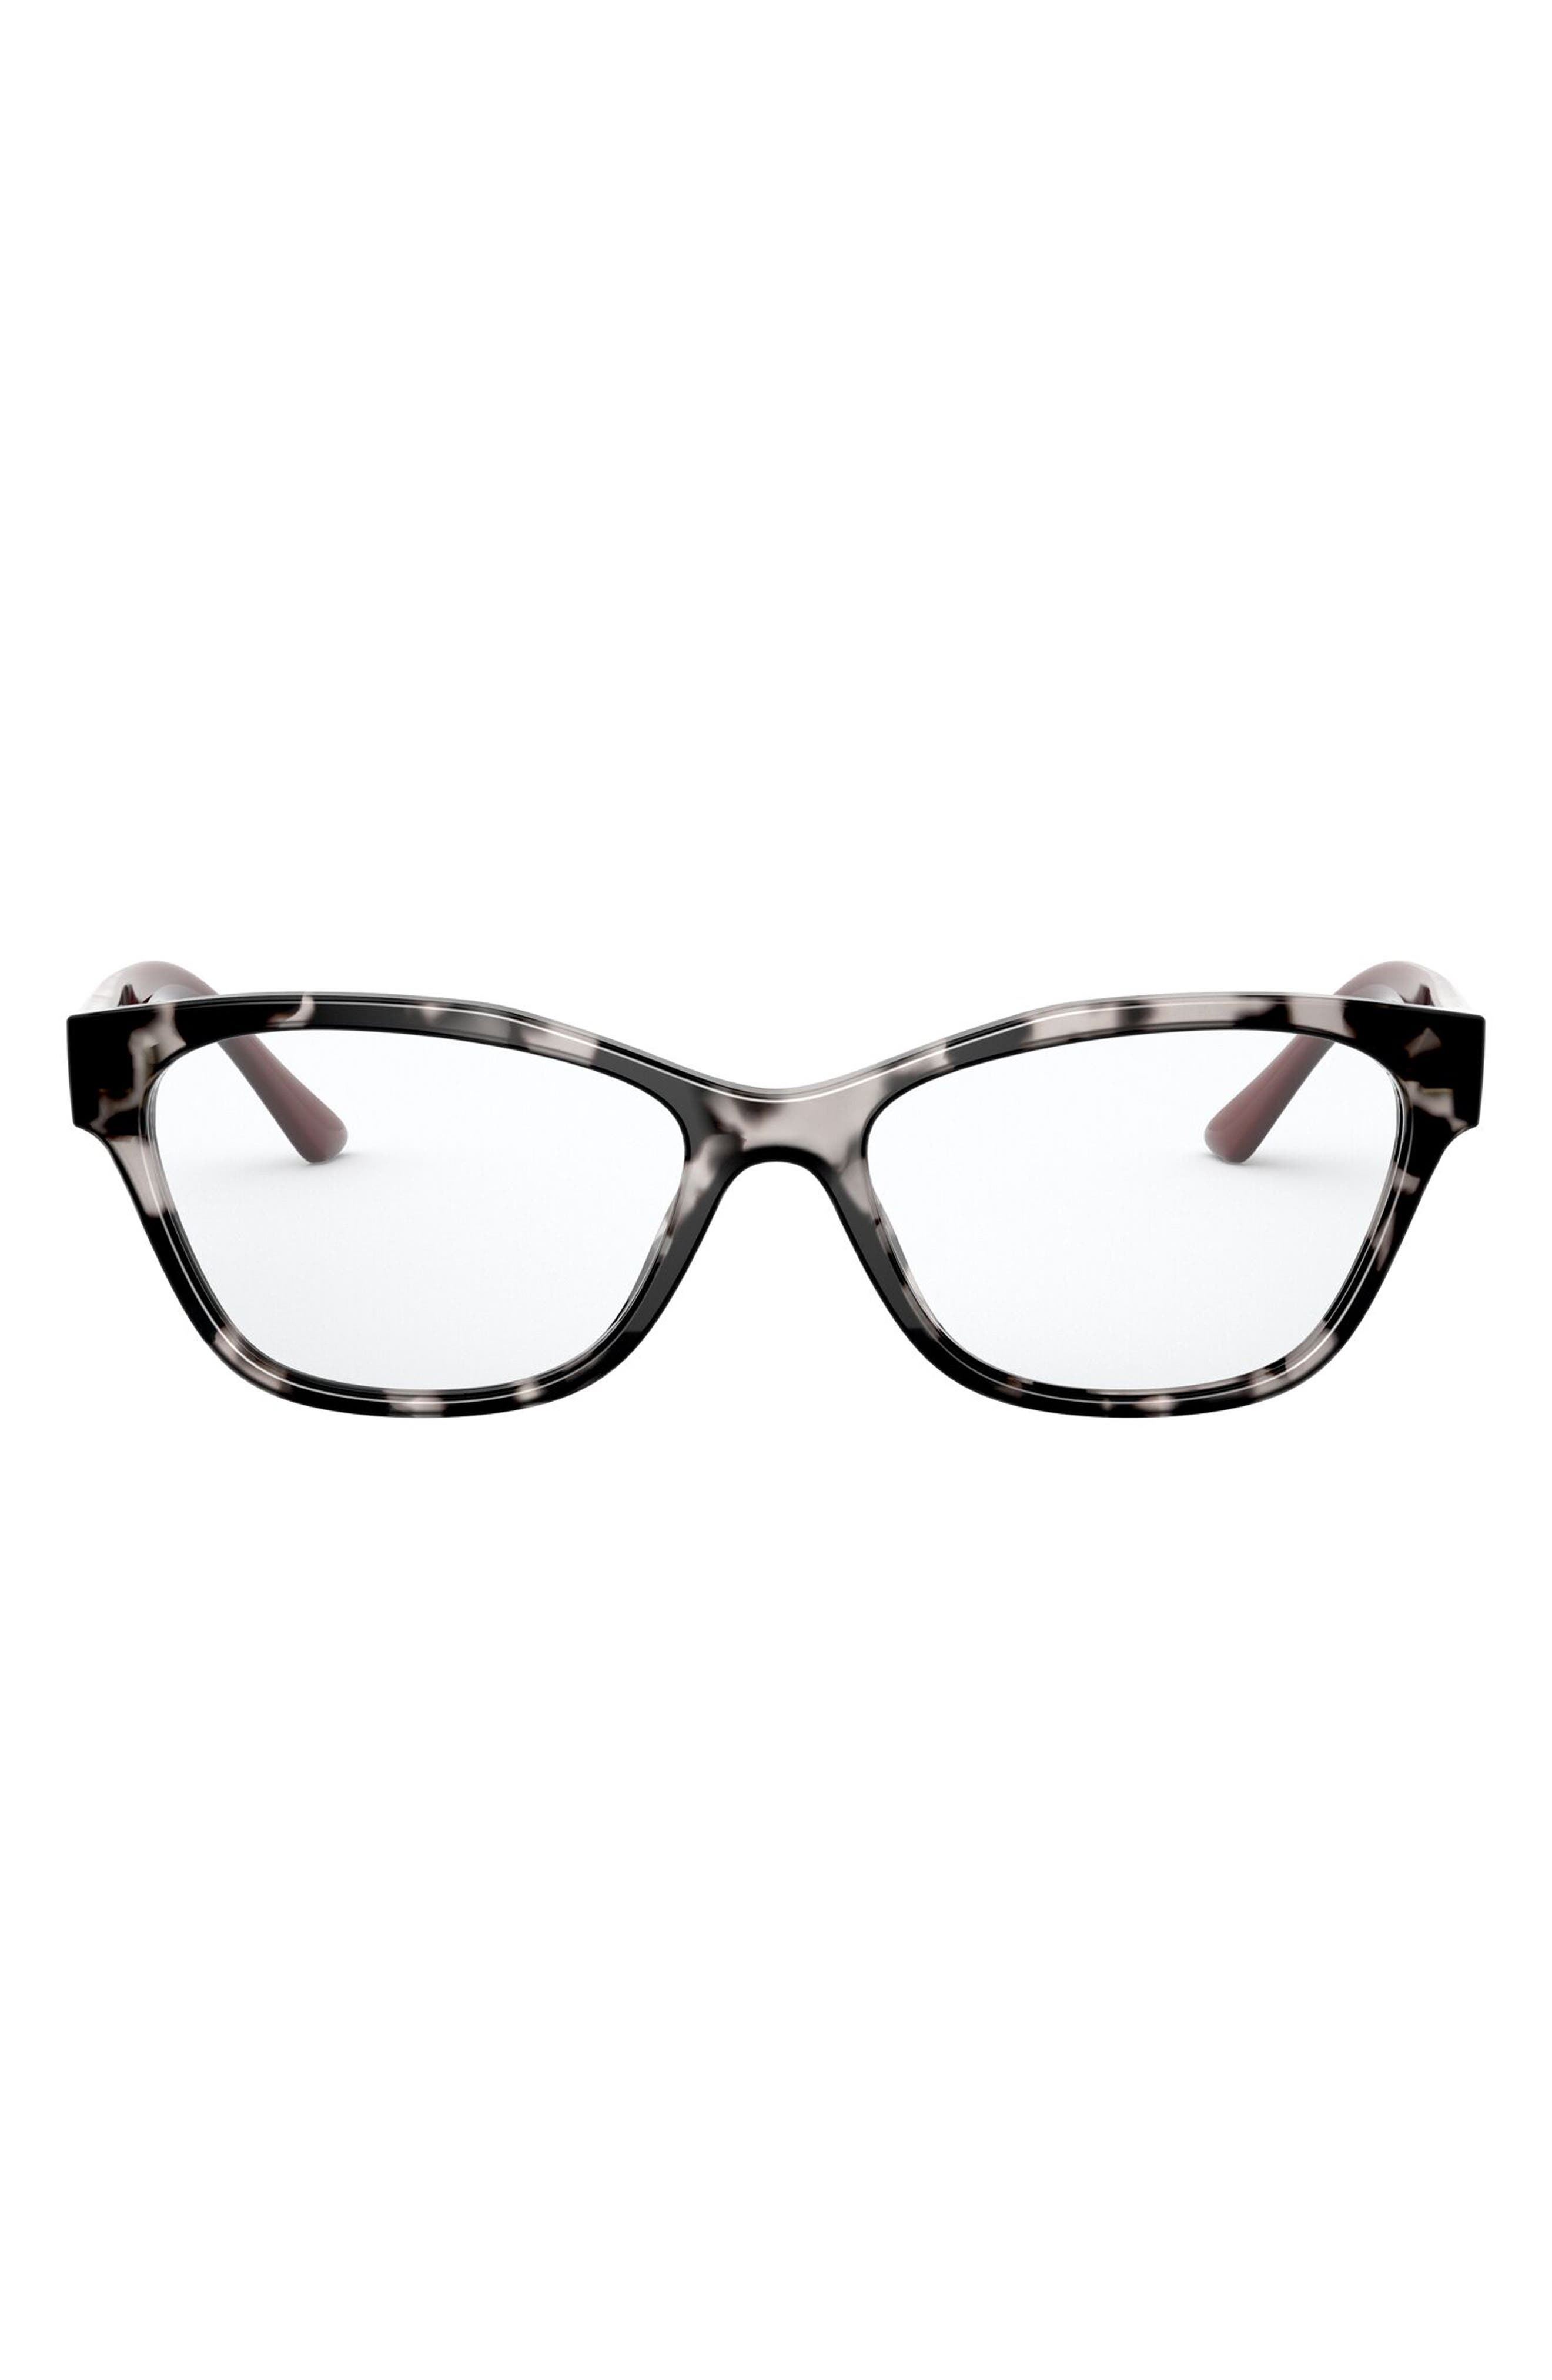 Prada Pillow 53mm Optical Glasses in Spotted Grey at Nordstrom